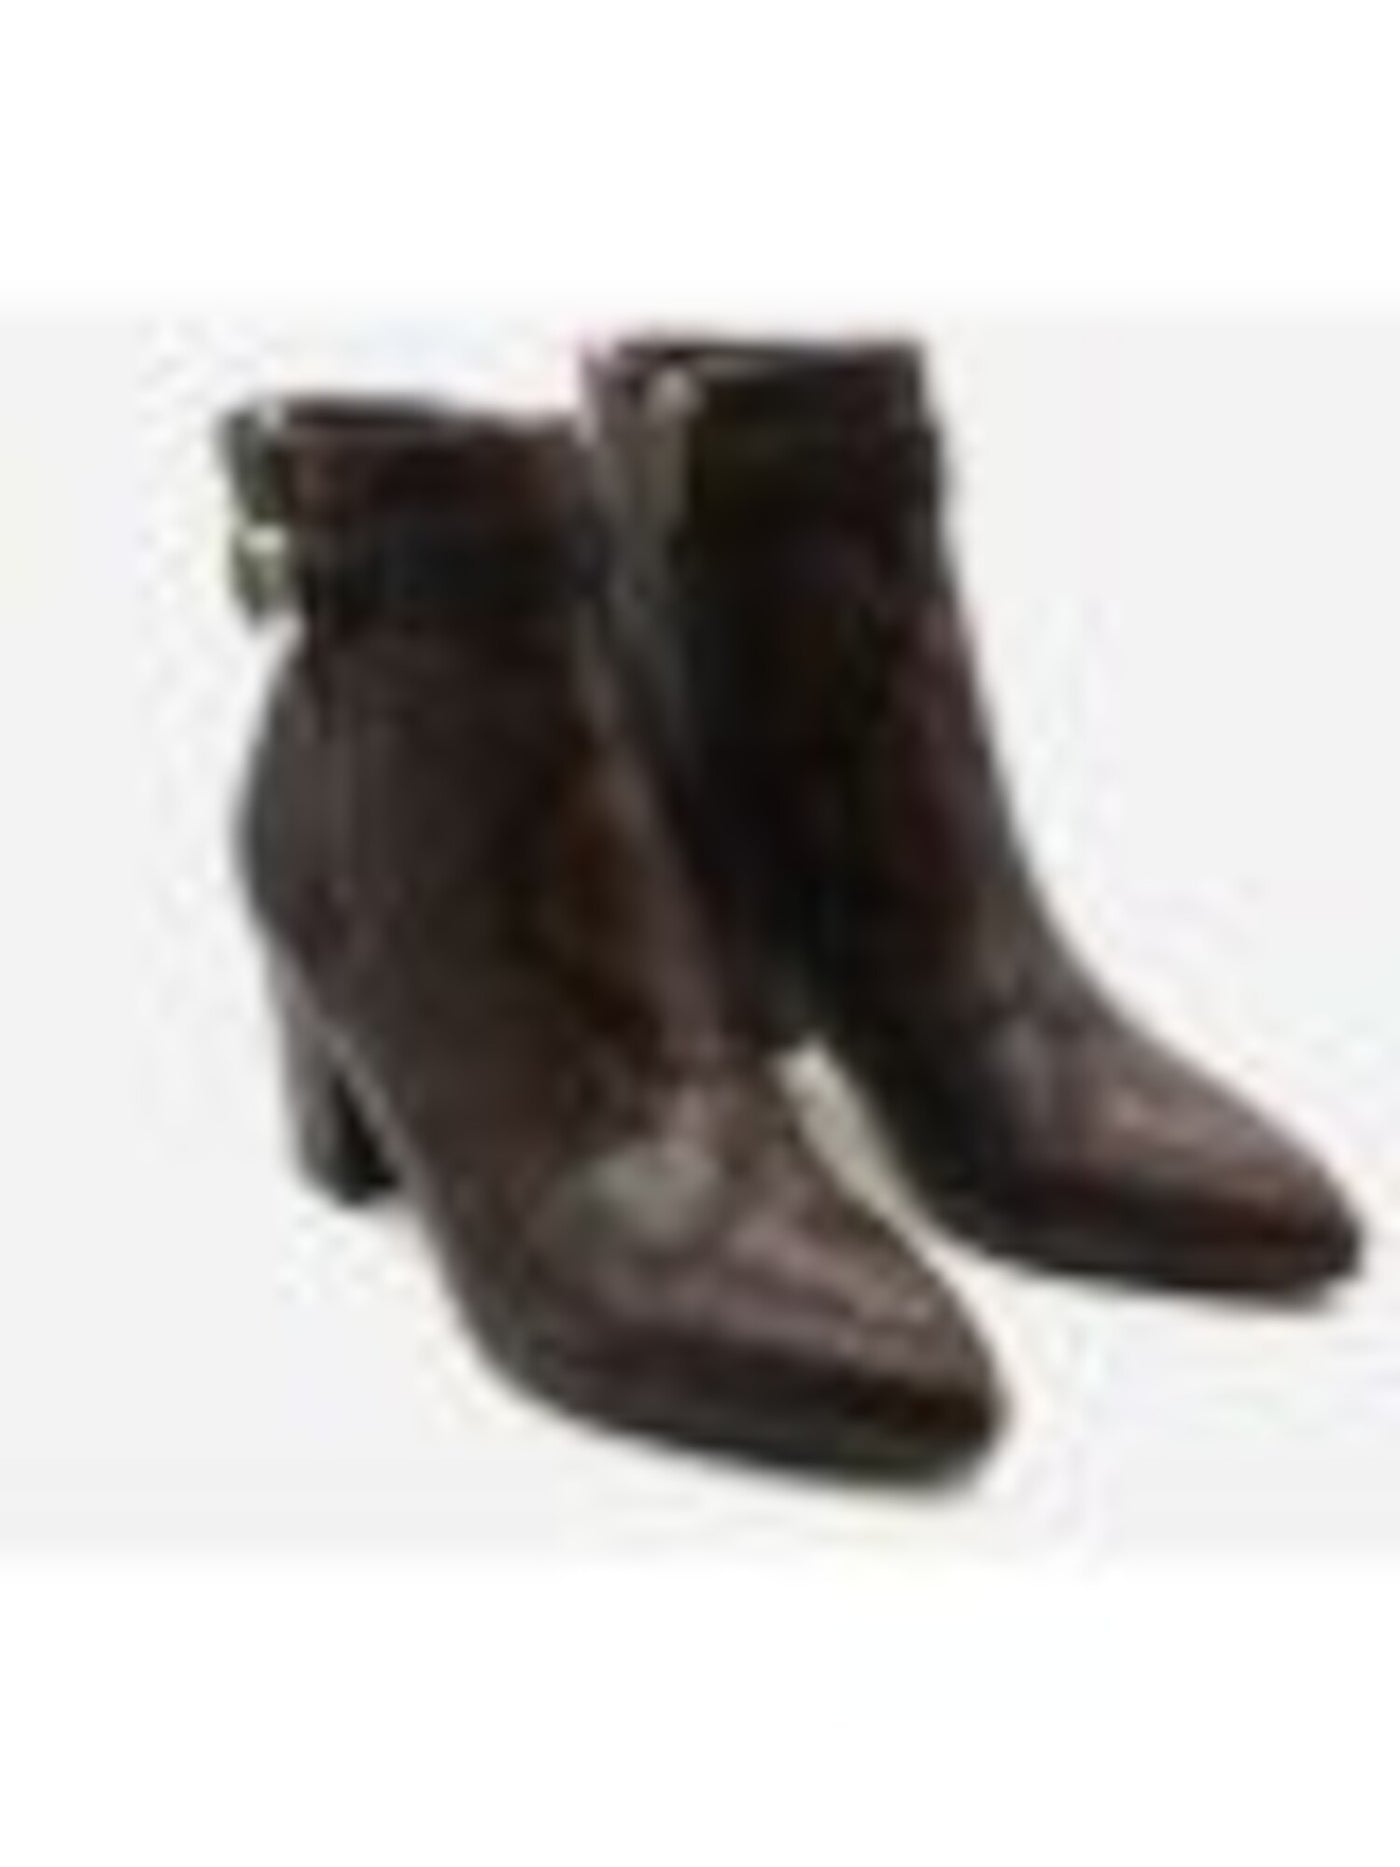 TOMMY HILFIGER Womens Brown Mixed Material Cushioned Buckle Accent Halliri Pointed Toe Block Heel Zip-Up Dress Booties 8